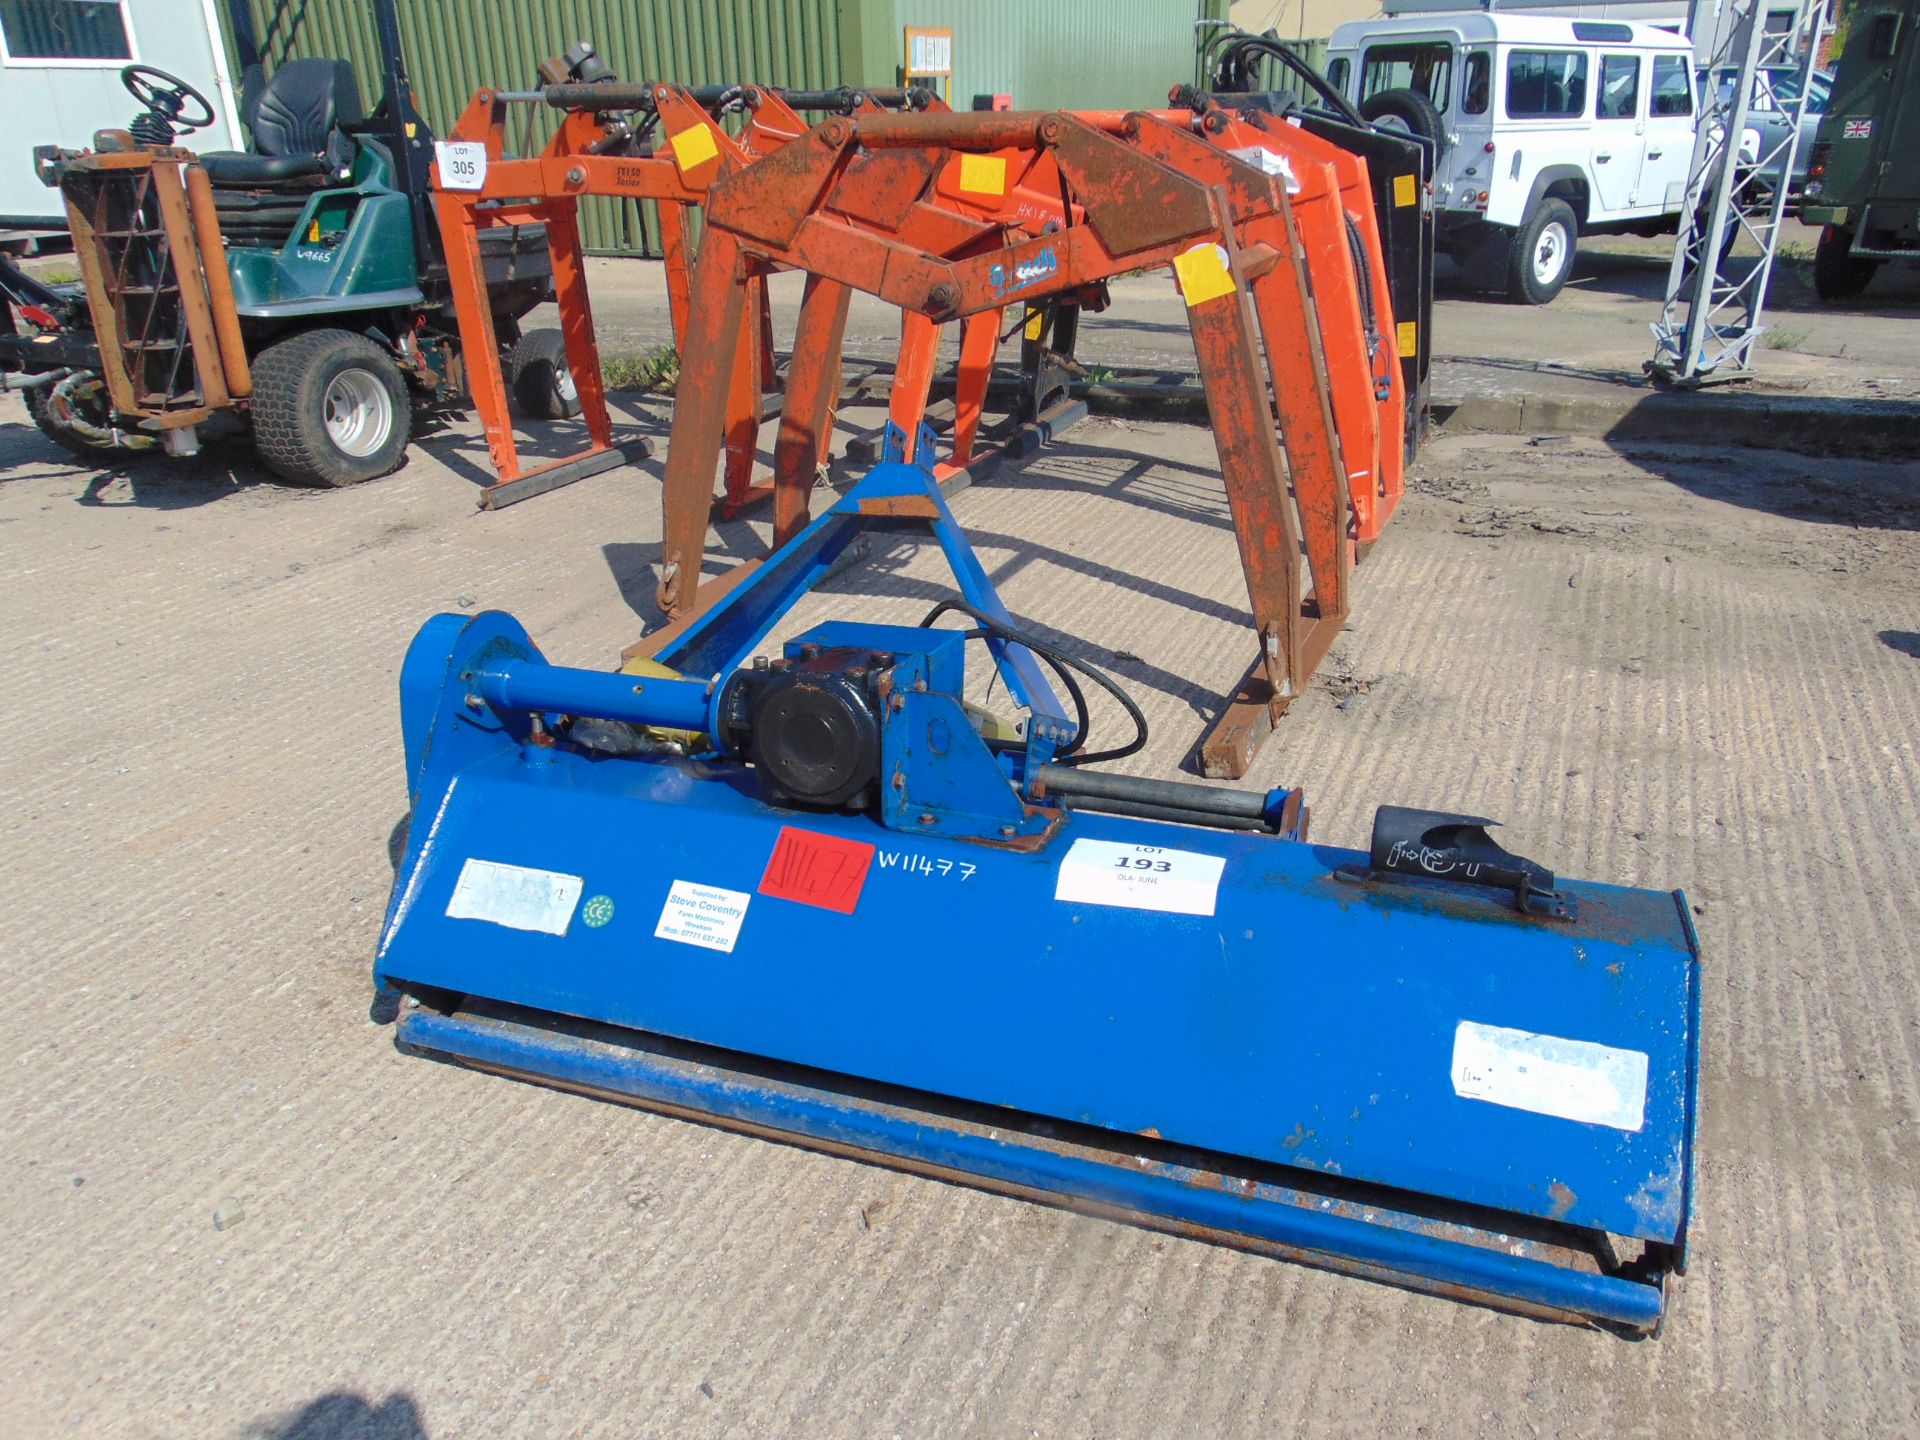 1-7 M TRACTOR MOUNTED FLAIL MOWER WITH HYDRAULIC SIDE SHIFT AND PTO SHAFT - Image 2 of 6